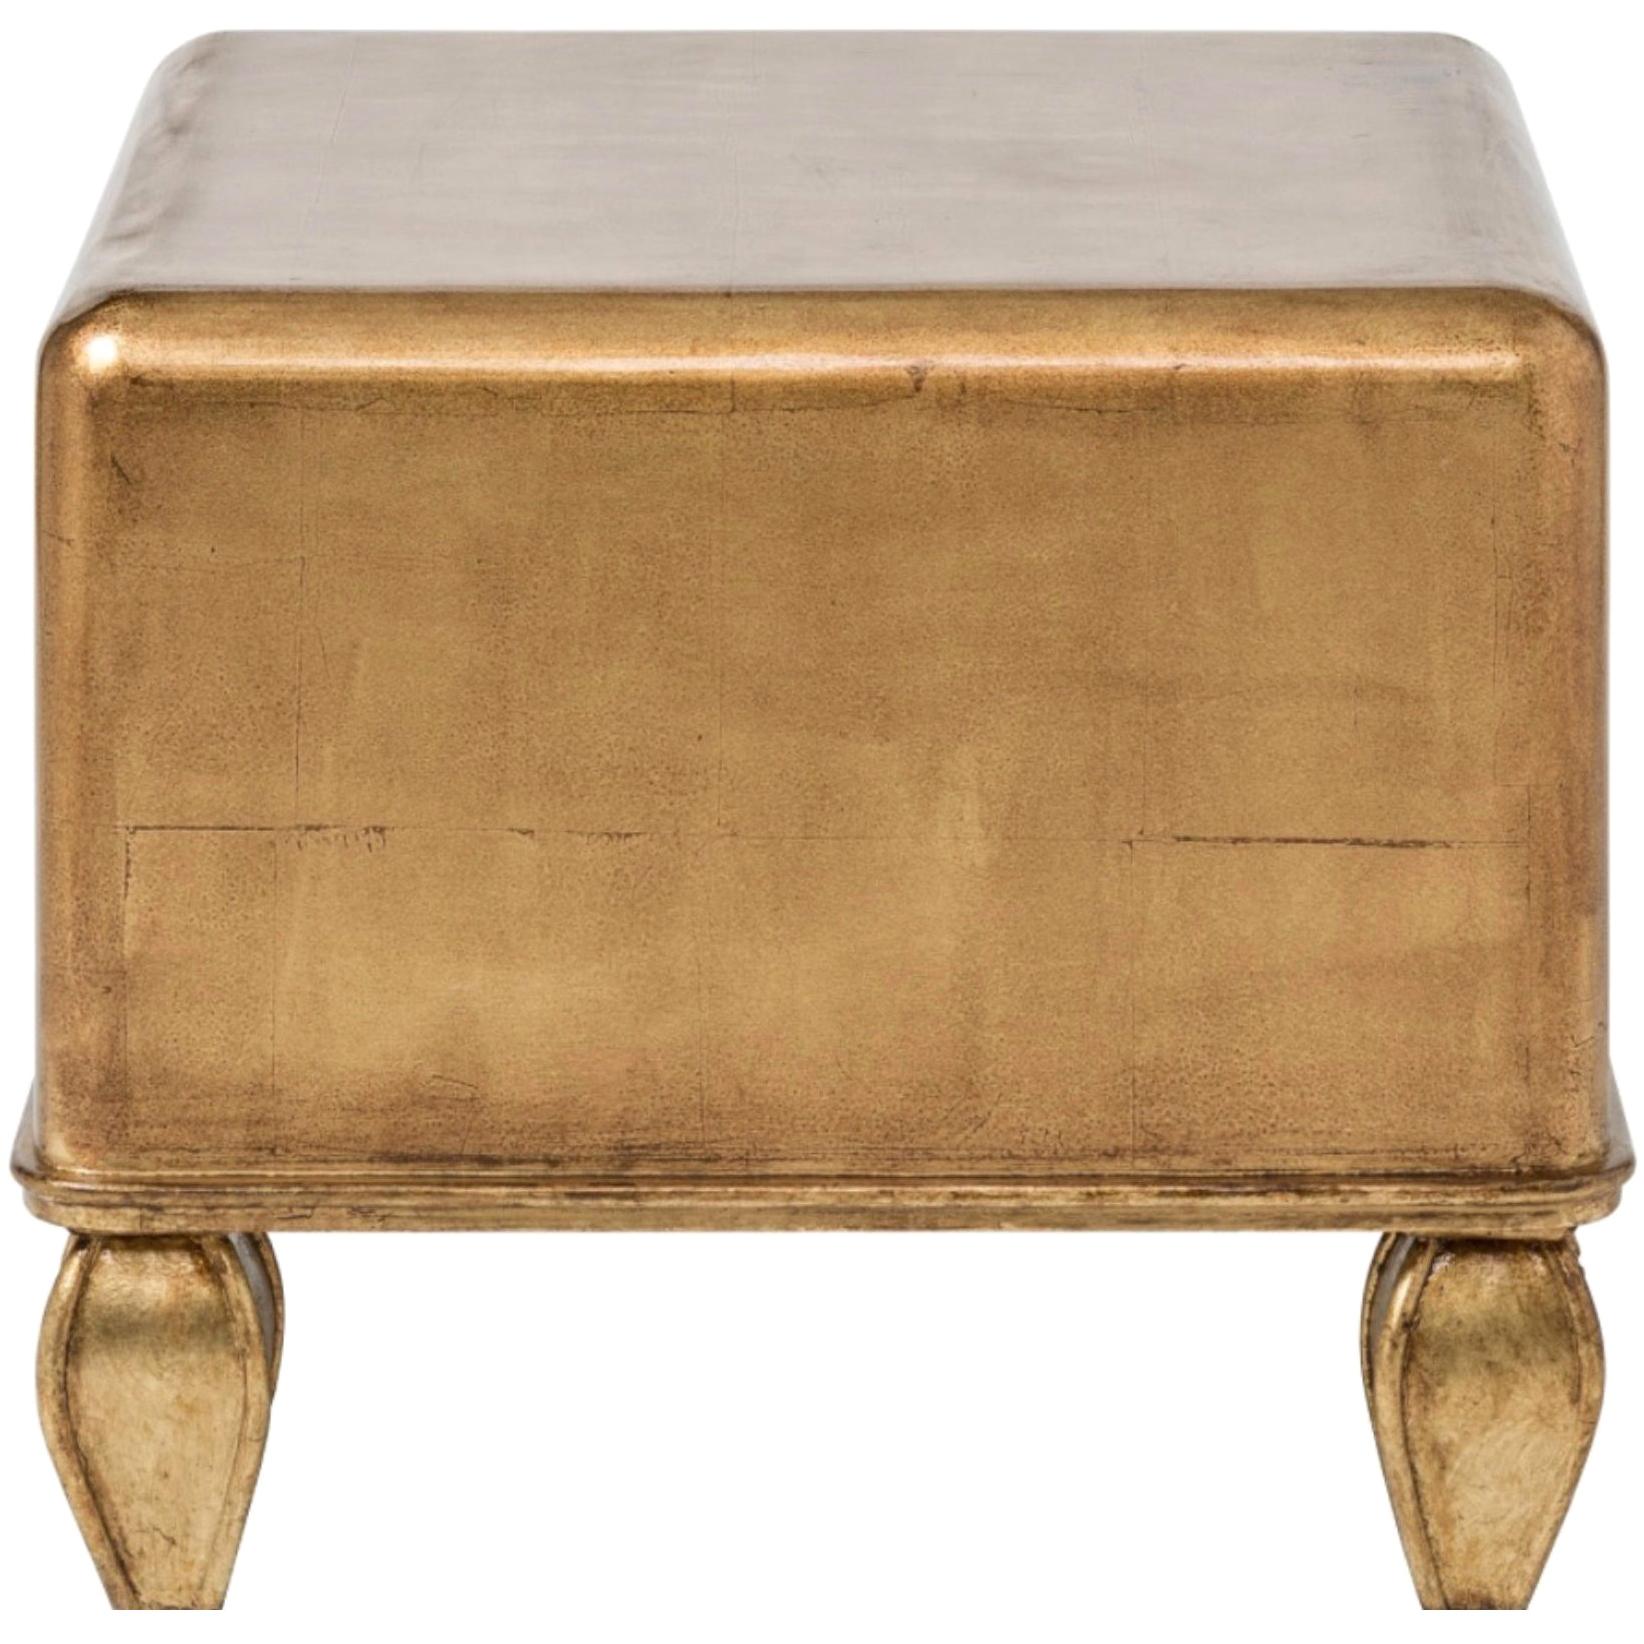 Contemporary Giltwood Coffee Table